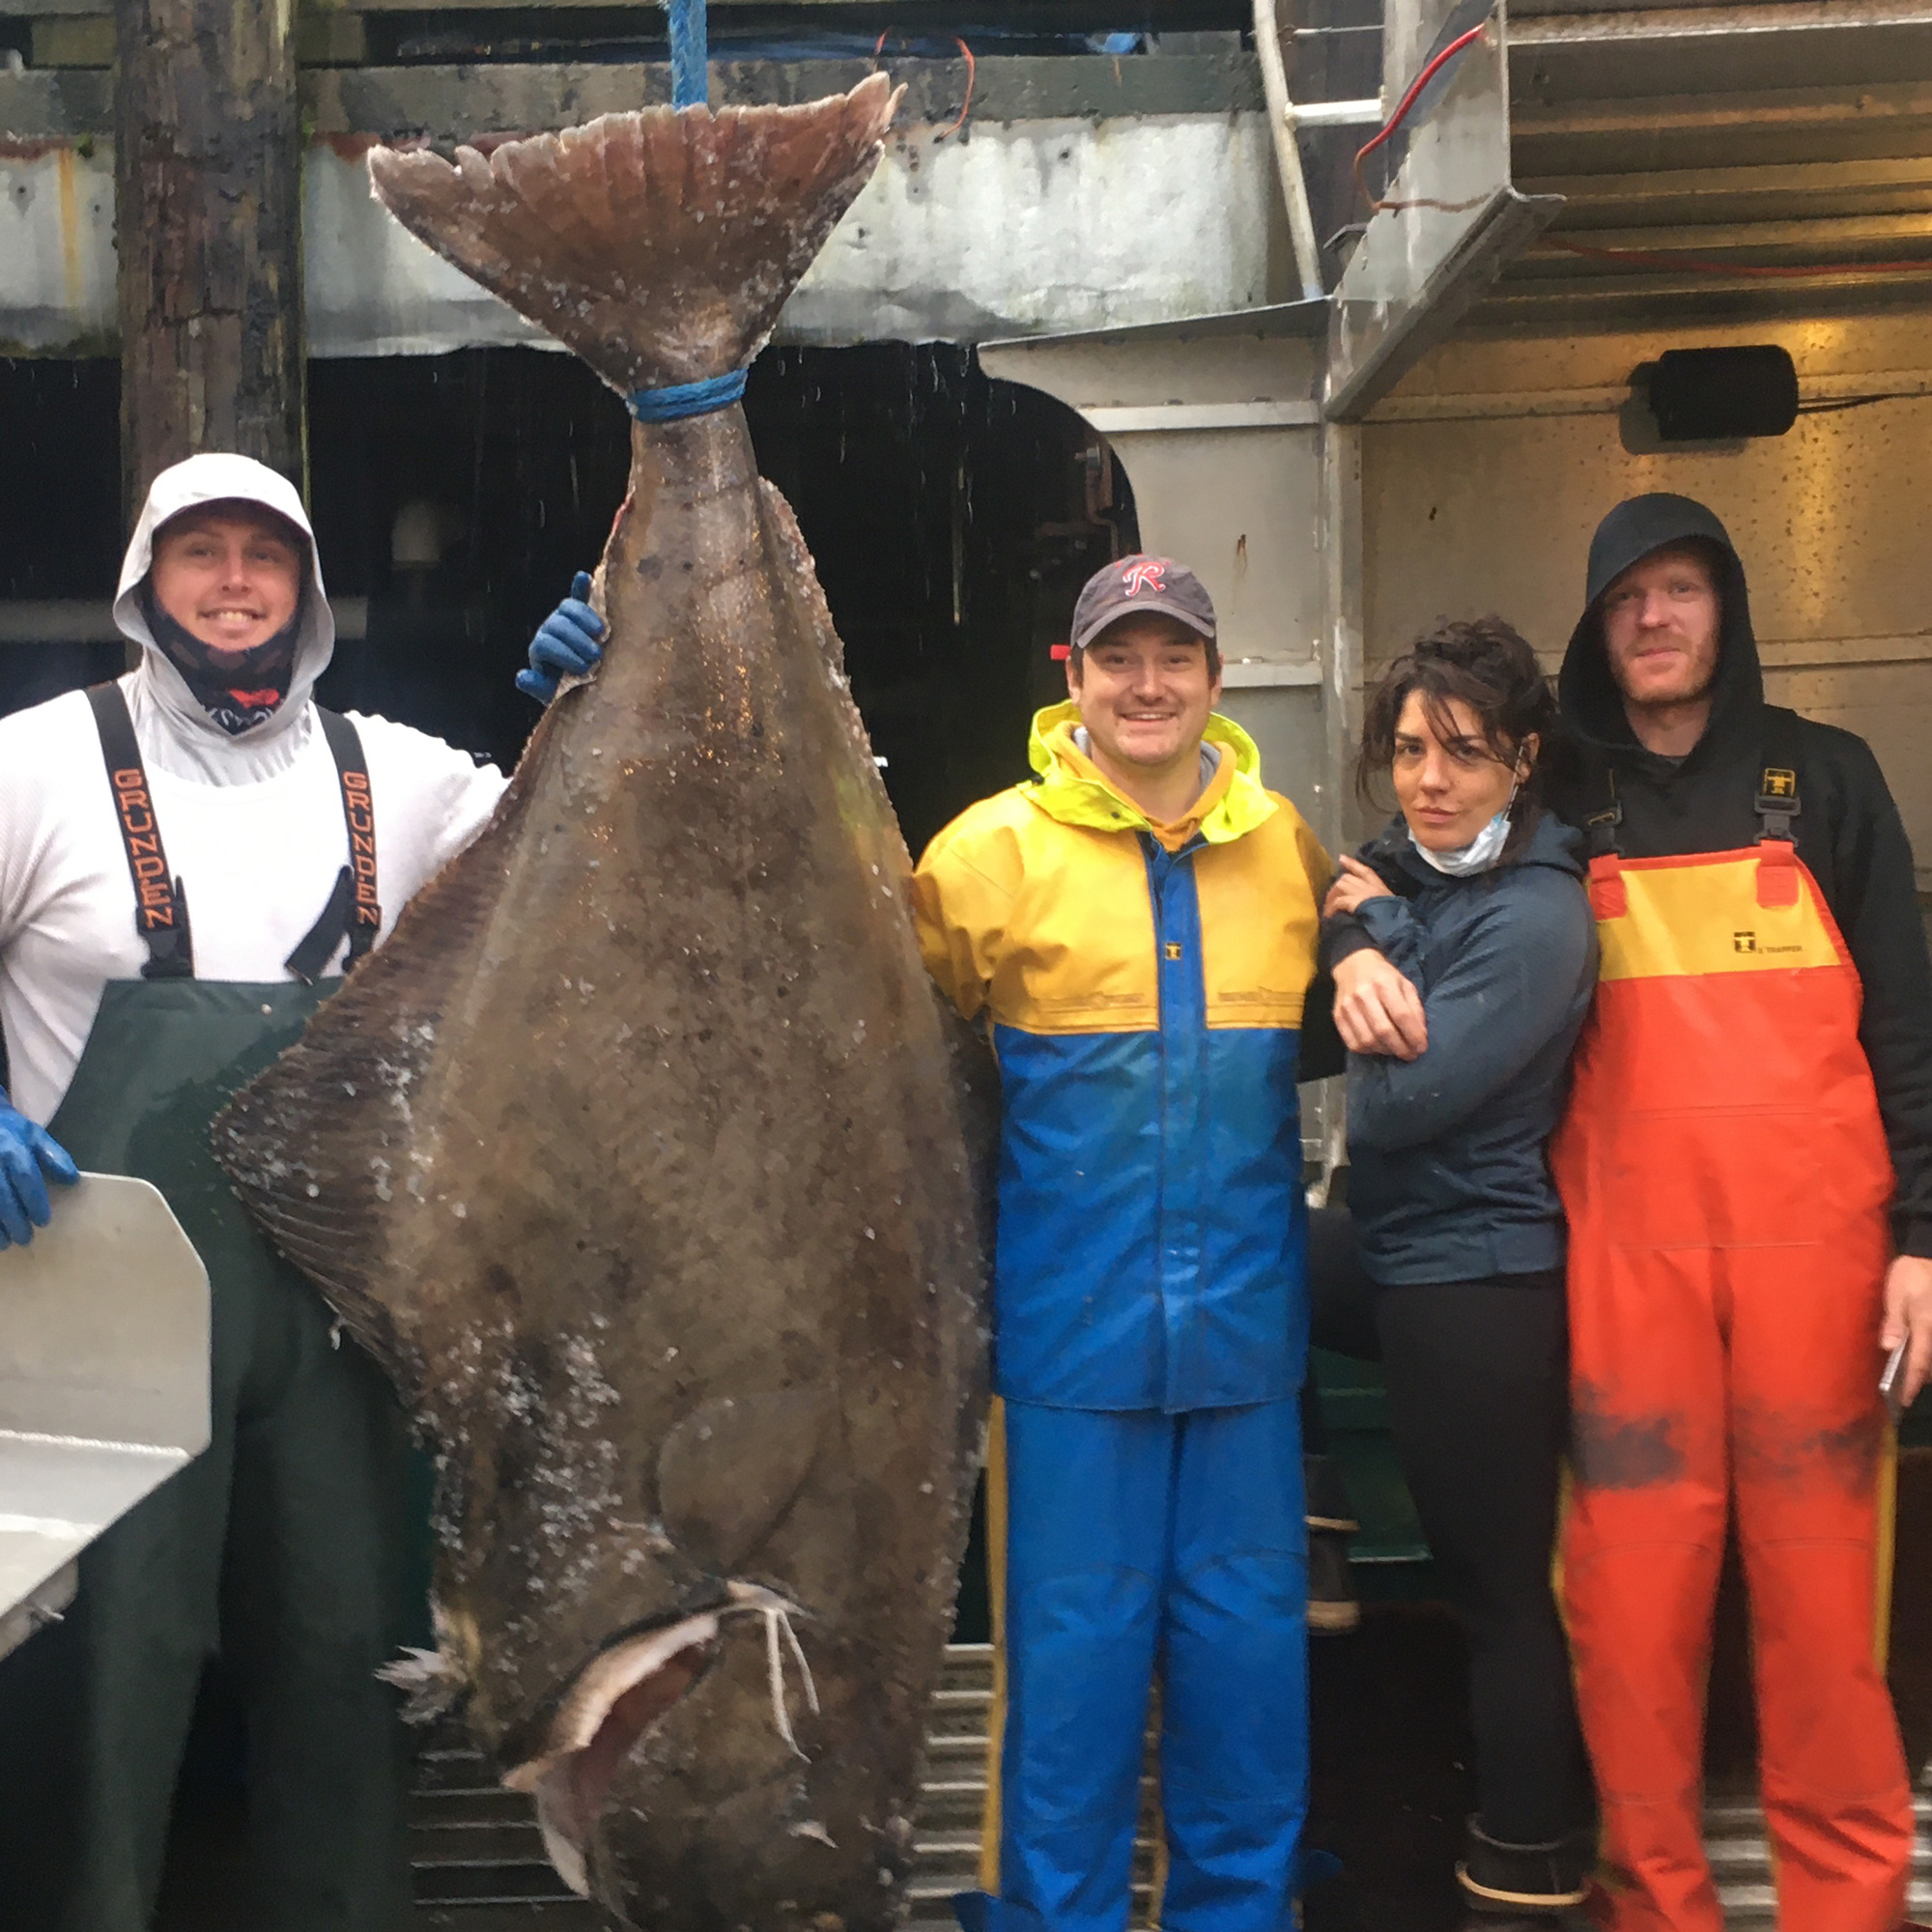 Kat Miller and team members posing with large fish